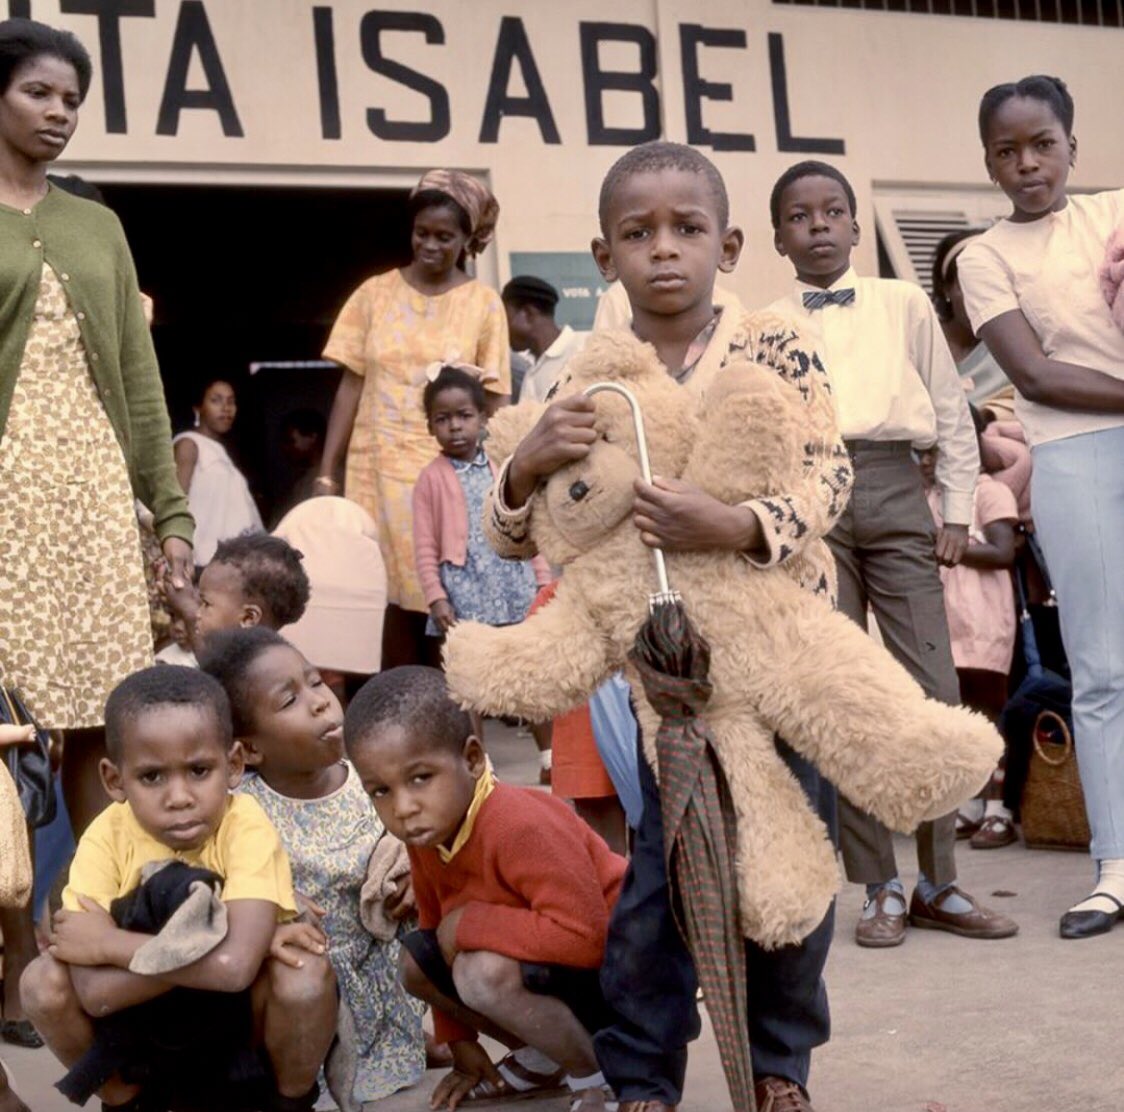 Santa-Isabel airport [Bioko Island, Equatorial Guinea]. Arrival of the first foreign civilians from Biafra during the Nigeria-Biafra war. The International Red Cross had begun relief flights into Biafra from Santa Isabel in July 1968.